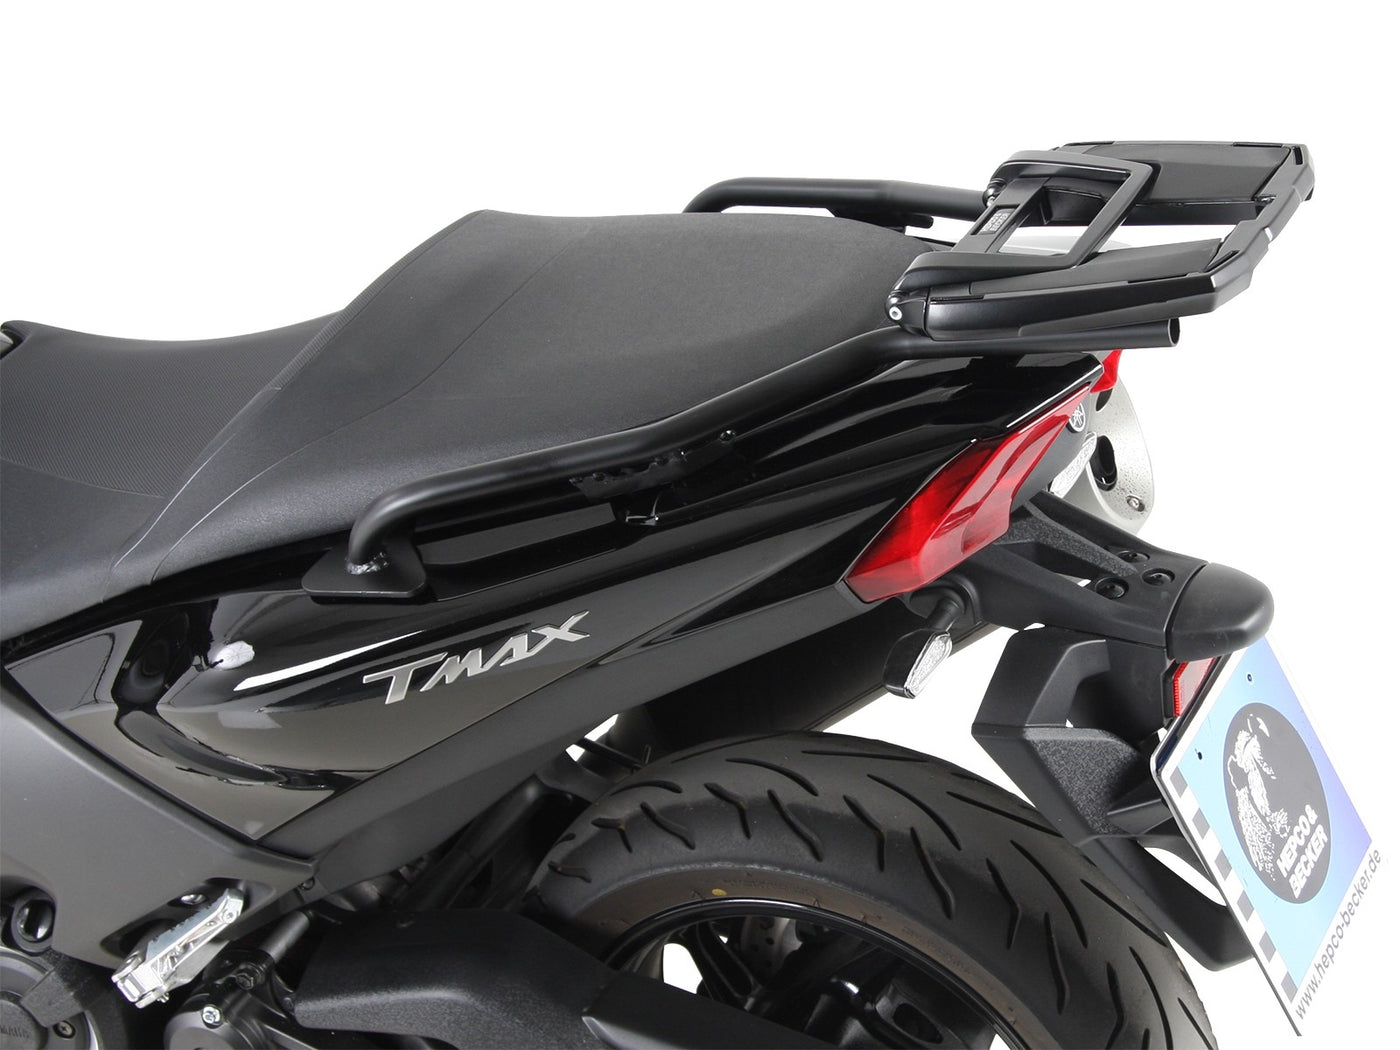 Easyrack Topcase Carrier for YAMAHA T-Max 530 (2017-2019) / 560 / Tech Max (2020-2021)